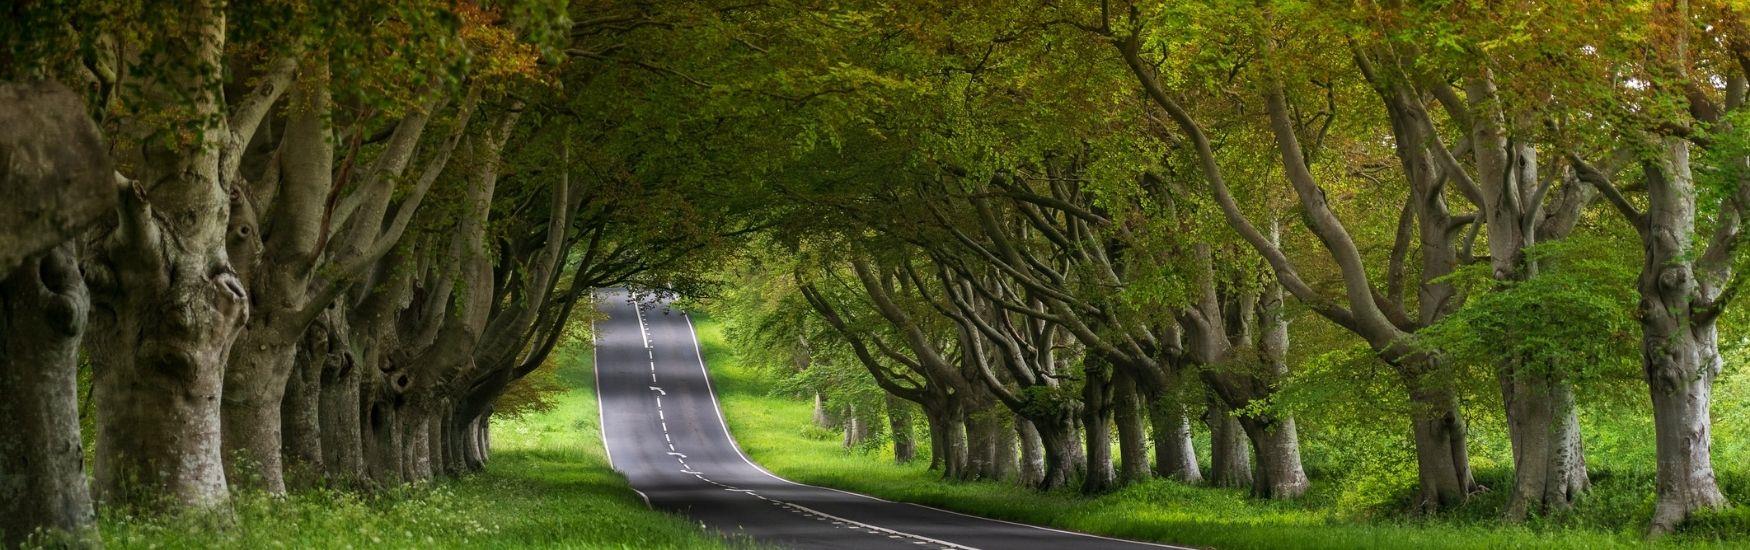 The Stunning Beech Avenue rows of trees located alongside Blandford road as you head into Wimborne